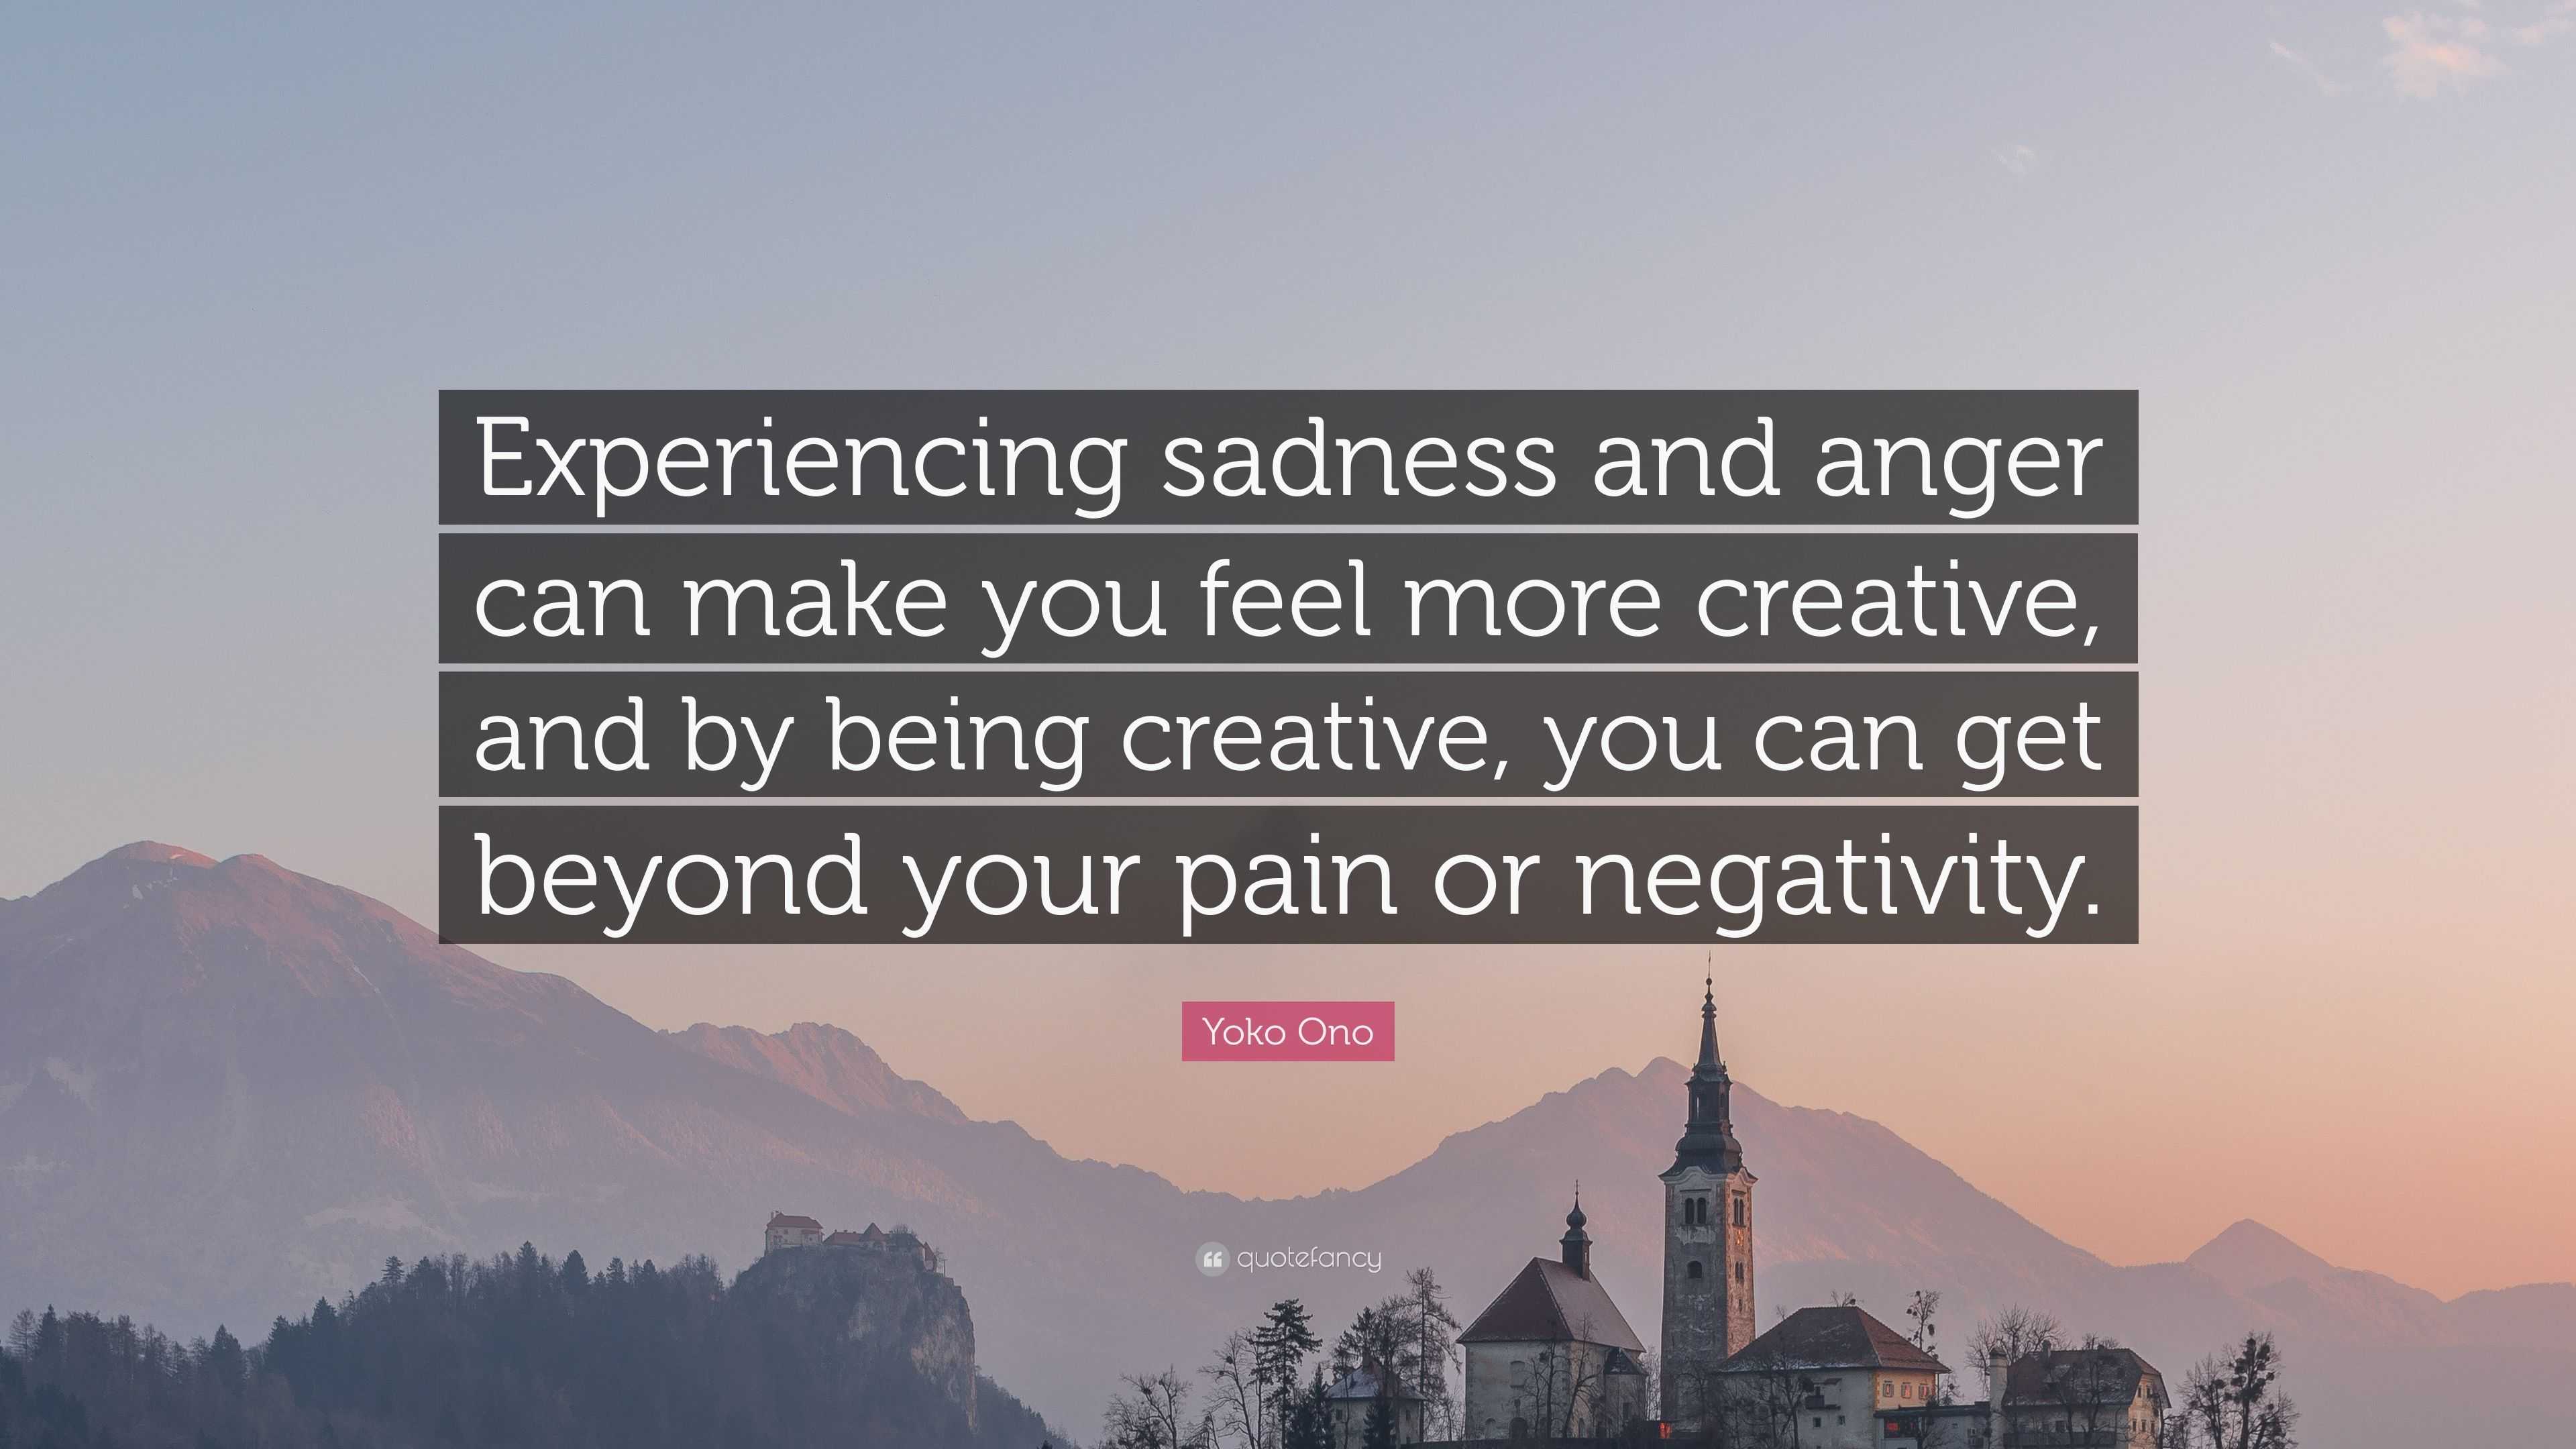 Yoko Ono Quote: “Experiencing sadness and anger can make you feel more ...